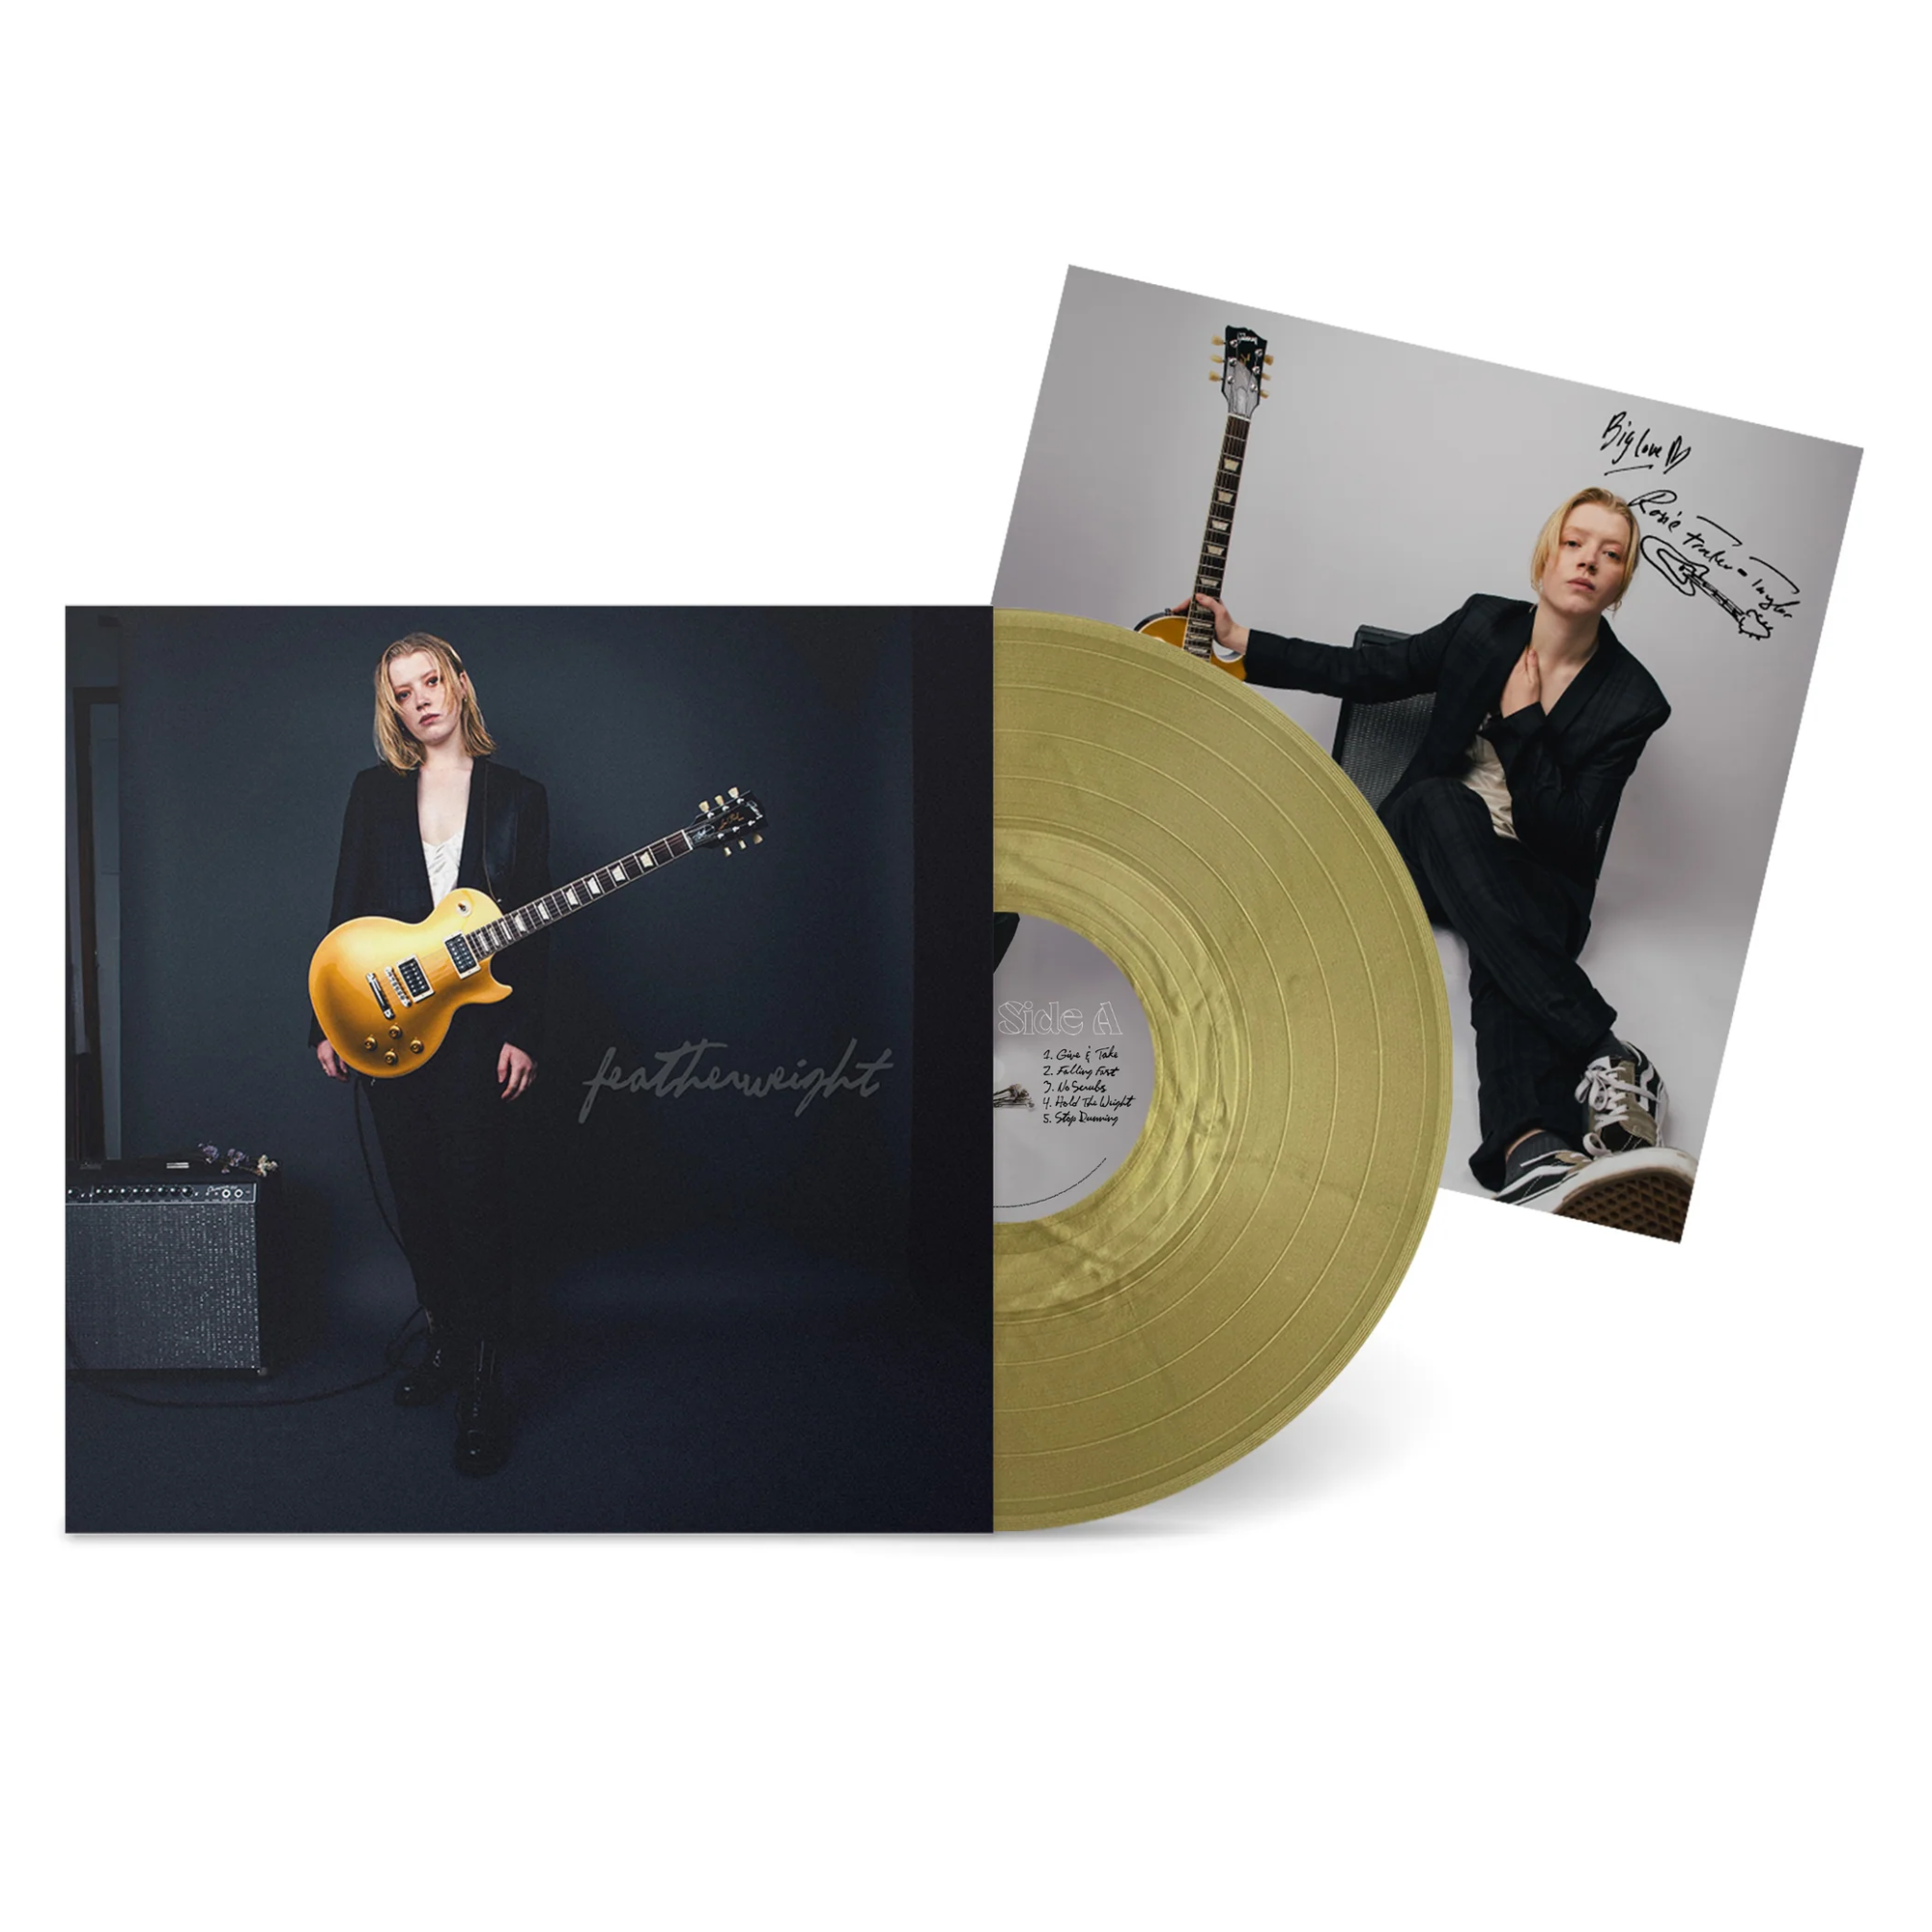 Featherweight: Limited Gold Vinyl LP + Signed Print